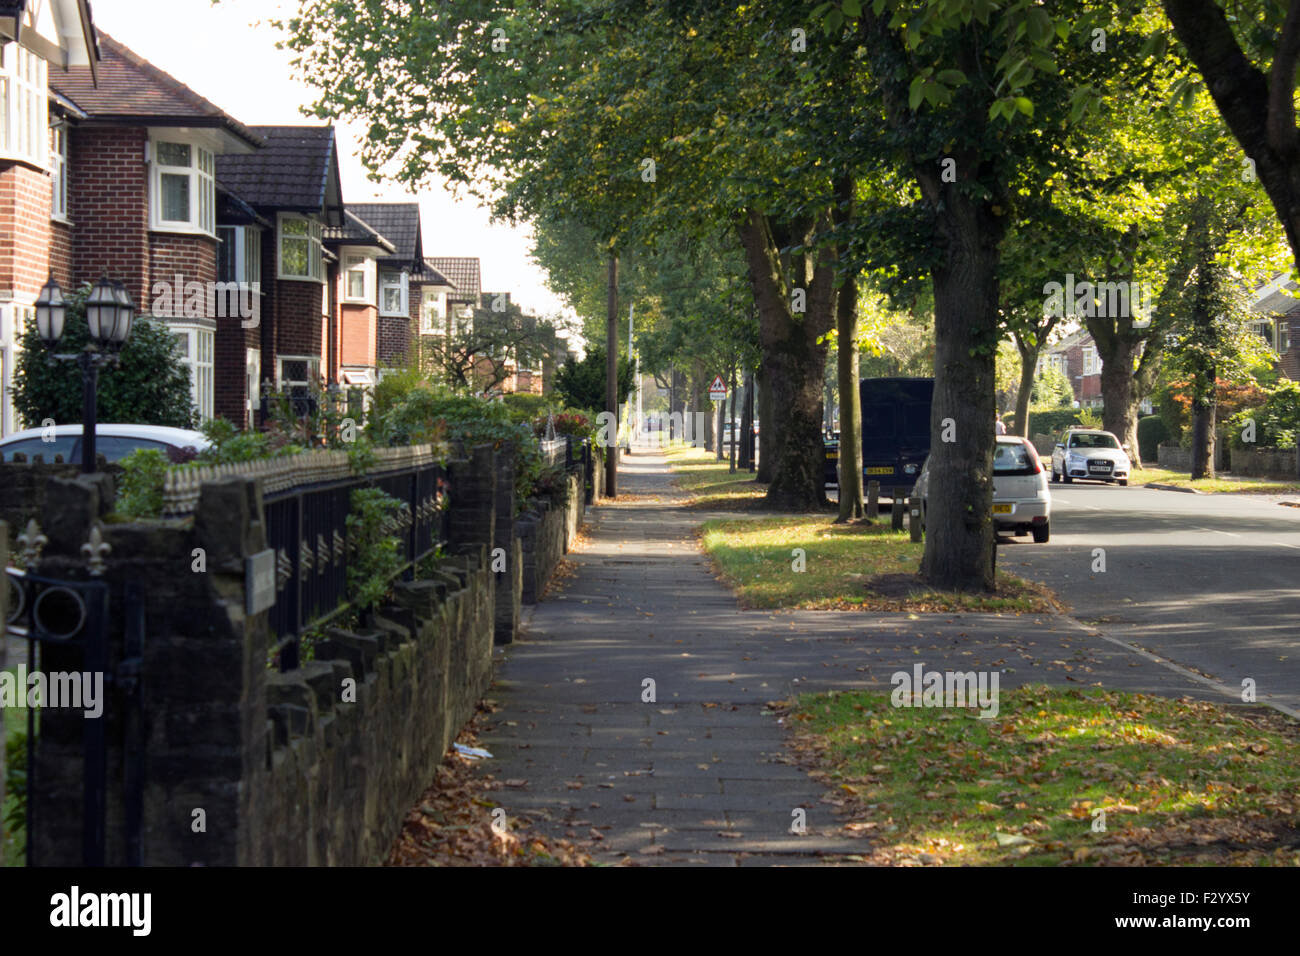 Looking down a pavement with grass as it stretches off in the distance. Trees and houses on each side. Stock Photo